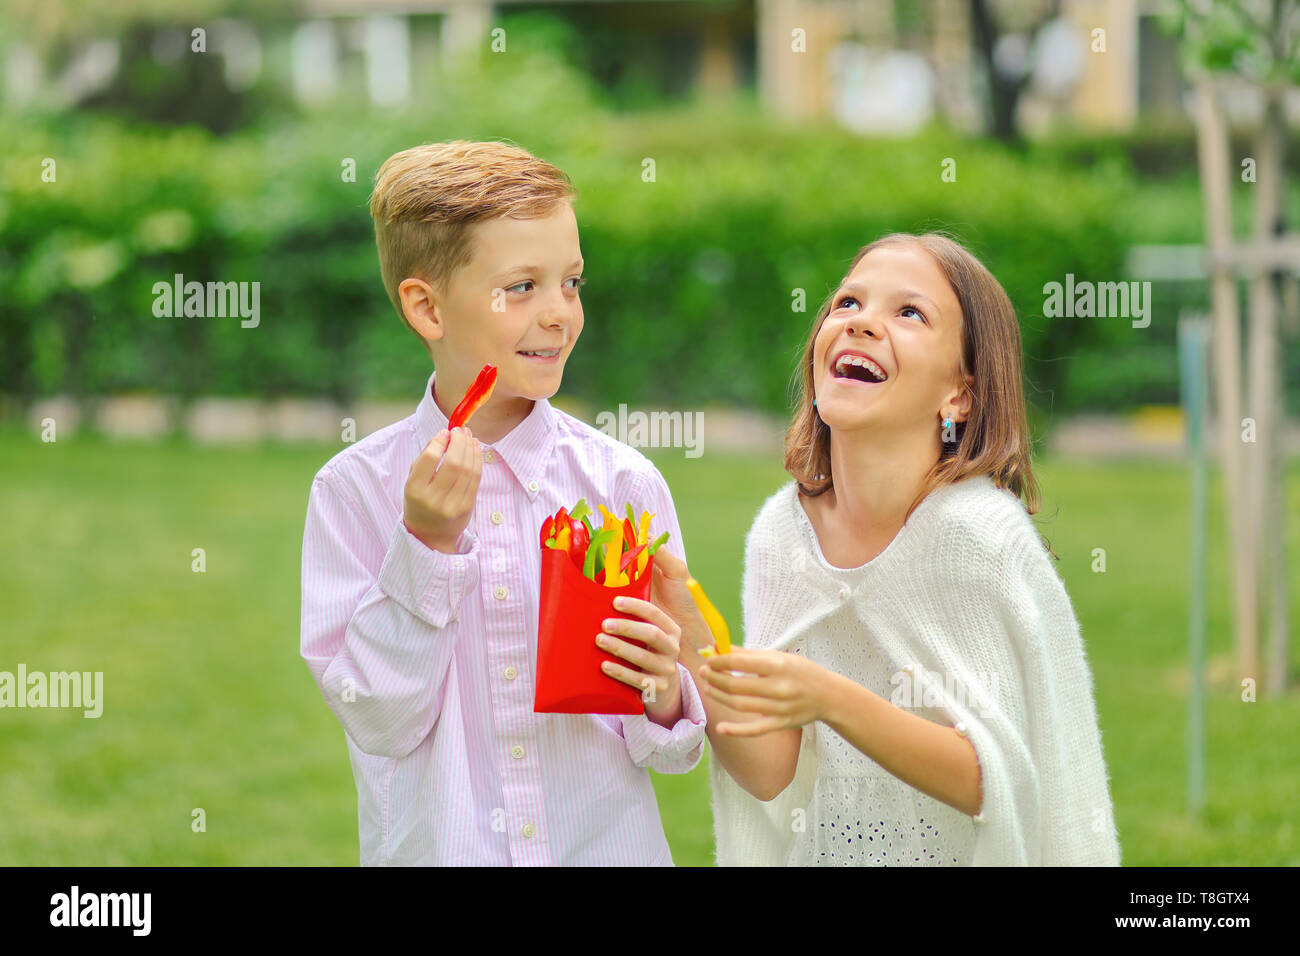 Happy kids eating fresh vegetables in nature - smiling children sharing colorful bio peppers sliced in form of french fries - little boy and girl Stock Photo